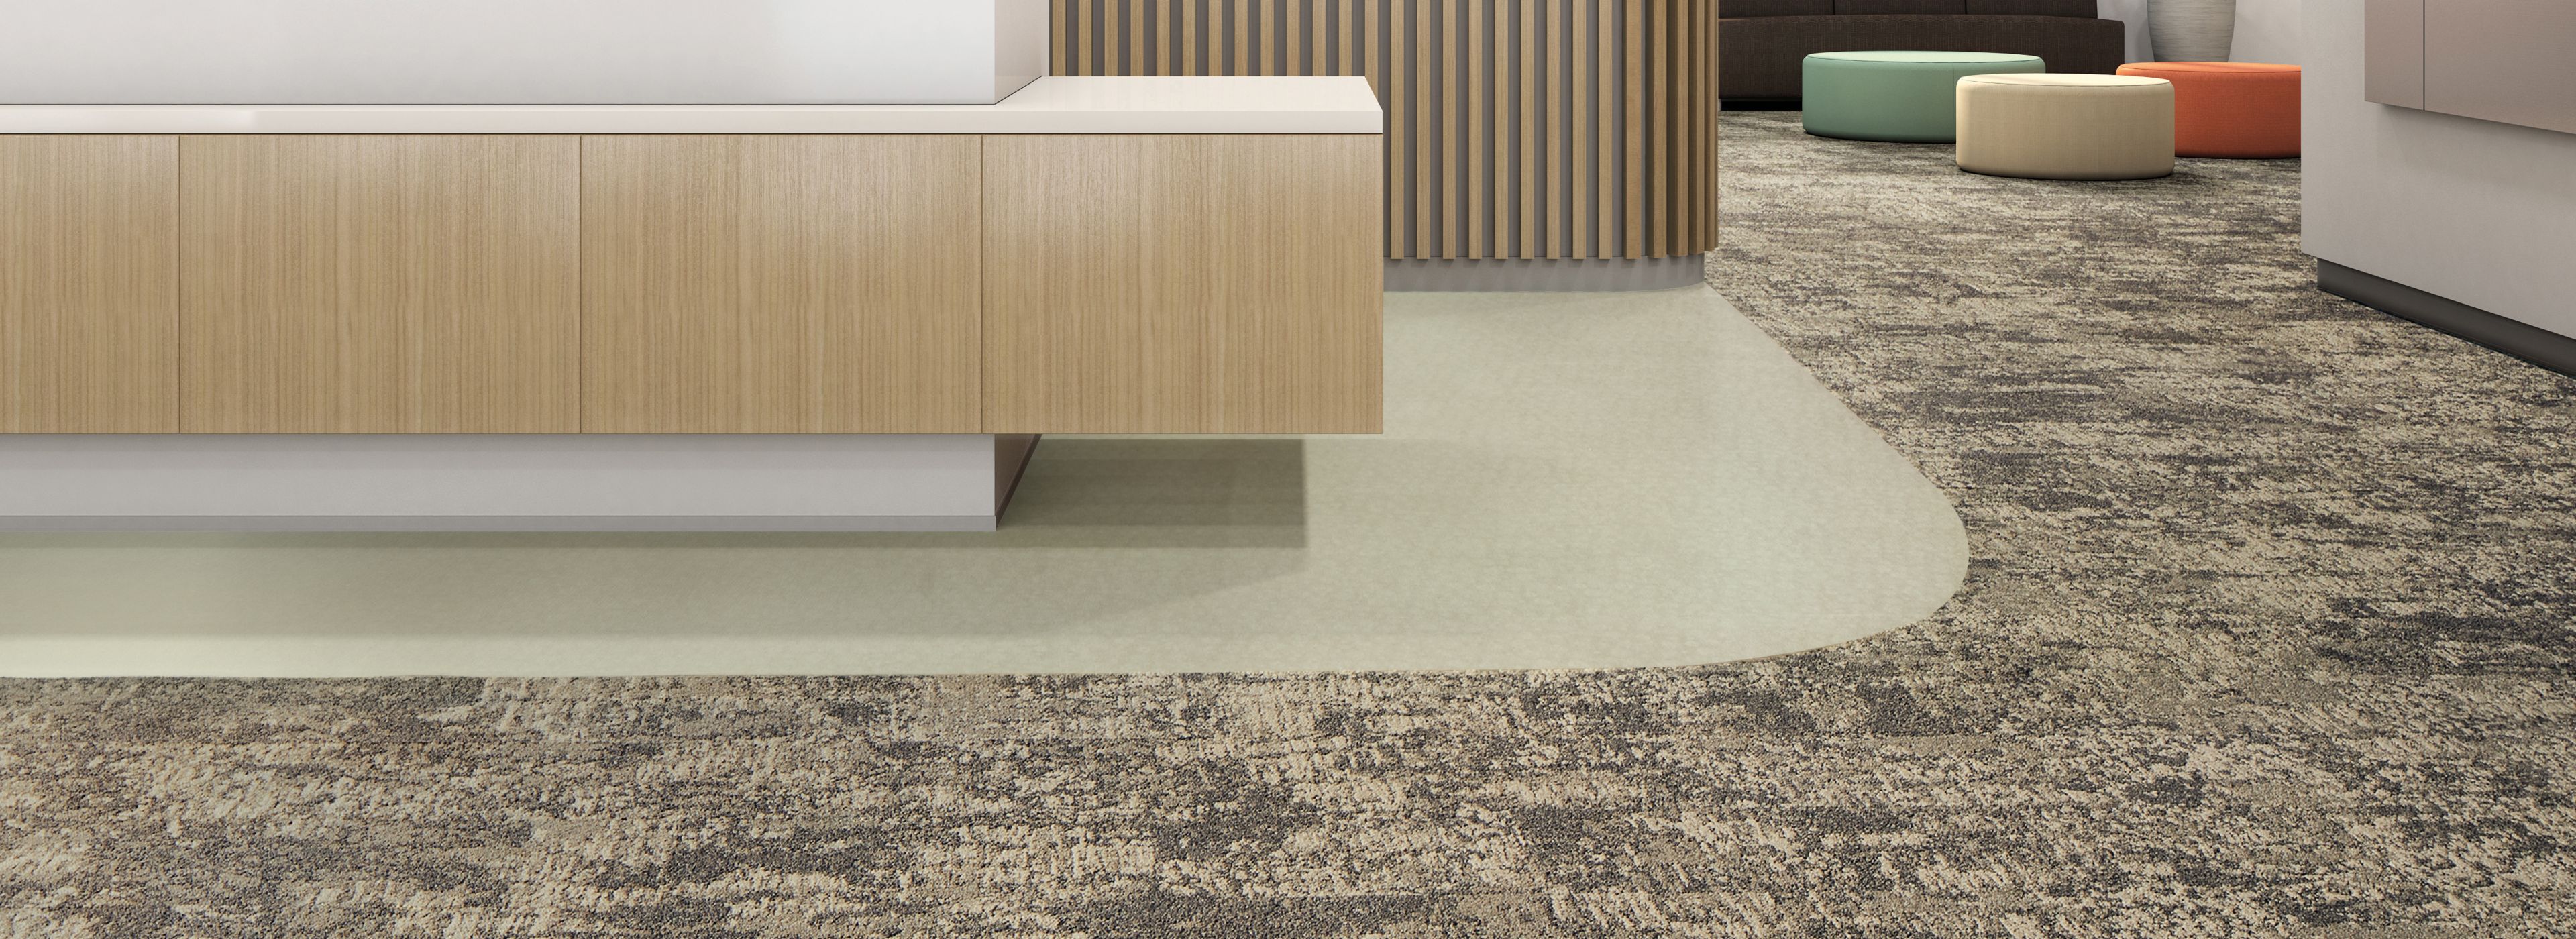 Interface Cactus Makes Perfect LVT and Just Deserts plank carpet tile in reception and waiting area imagen número 1